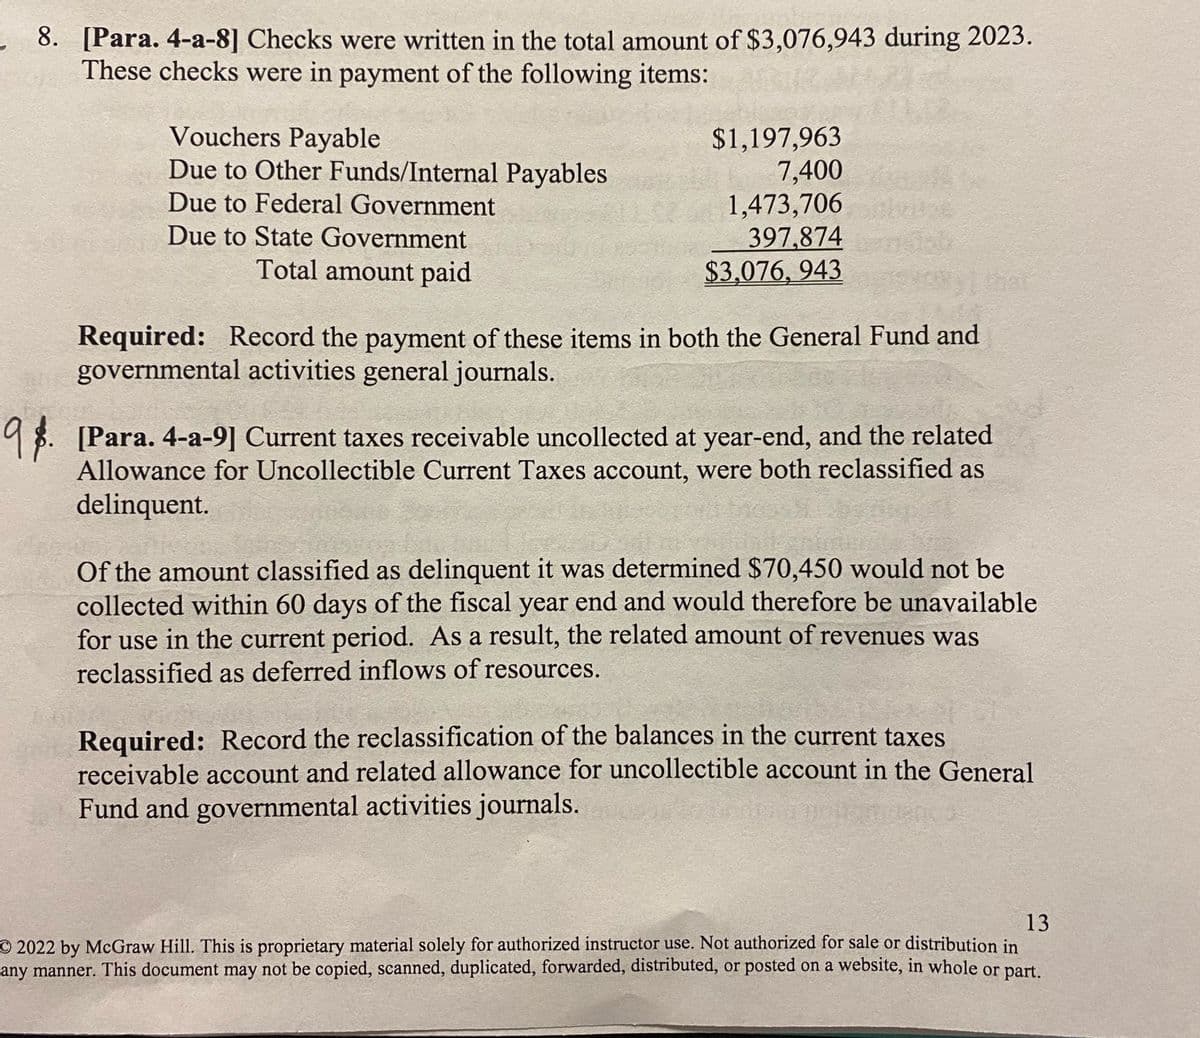 8. [Para. 4-a-8] Checks were written in the total amount of $3,076,943 during 2023.
These checks were in payment of the following items:
Vouchers Payable
Due to Other Funds/Internal Payables
Due to Federal Government
Due to State Government
Total amount paid
$1,197,963
7,400
1,473,706
397,874
$3,076,943
Required: Record the payment of these items in both the General Fund and
governmental activities general journals.
9. [Para. 4-a-9] Current taxes receivable uncollected at year-end, and the related
Allowance for Uncollectible Current Taxes account, were both reclassified as
delinquent.
Of the amount classified as delinquent it was determined $70,450 would not be
collected within 60 days of the fiscal year end and would therefore be unavailable
for use in the current period. As a result, the related amount of revenues was
reclassified as deferred inflows of resources.
Required: Record the reclassification of the balances in the current taxes
receivable account and related allowance for uncollectible account in the General
Fund and governmental activities journals.
13
O2022 by McGraw Hill. This is proprietary material solely for authorized instructor use. Not authorized for sale or distribution in
any manner. This document may not be copied, scanned, duplicated, forwarded, distributed, or posted on a website, in whole or part.